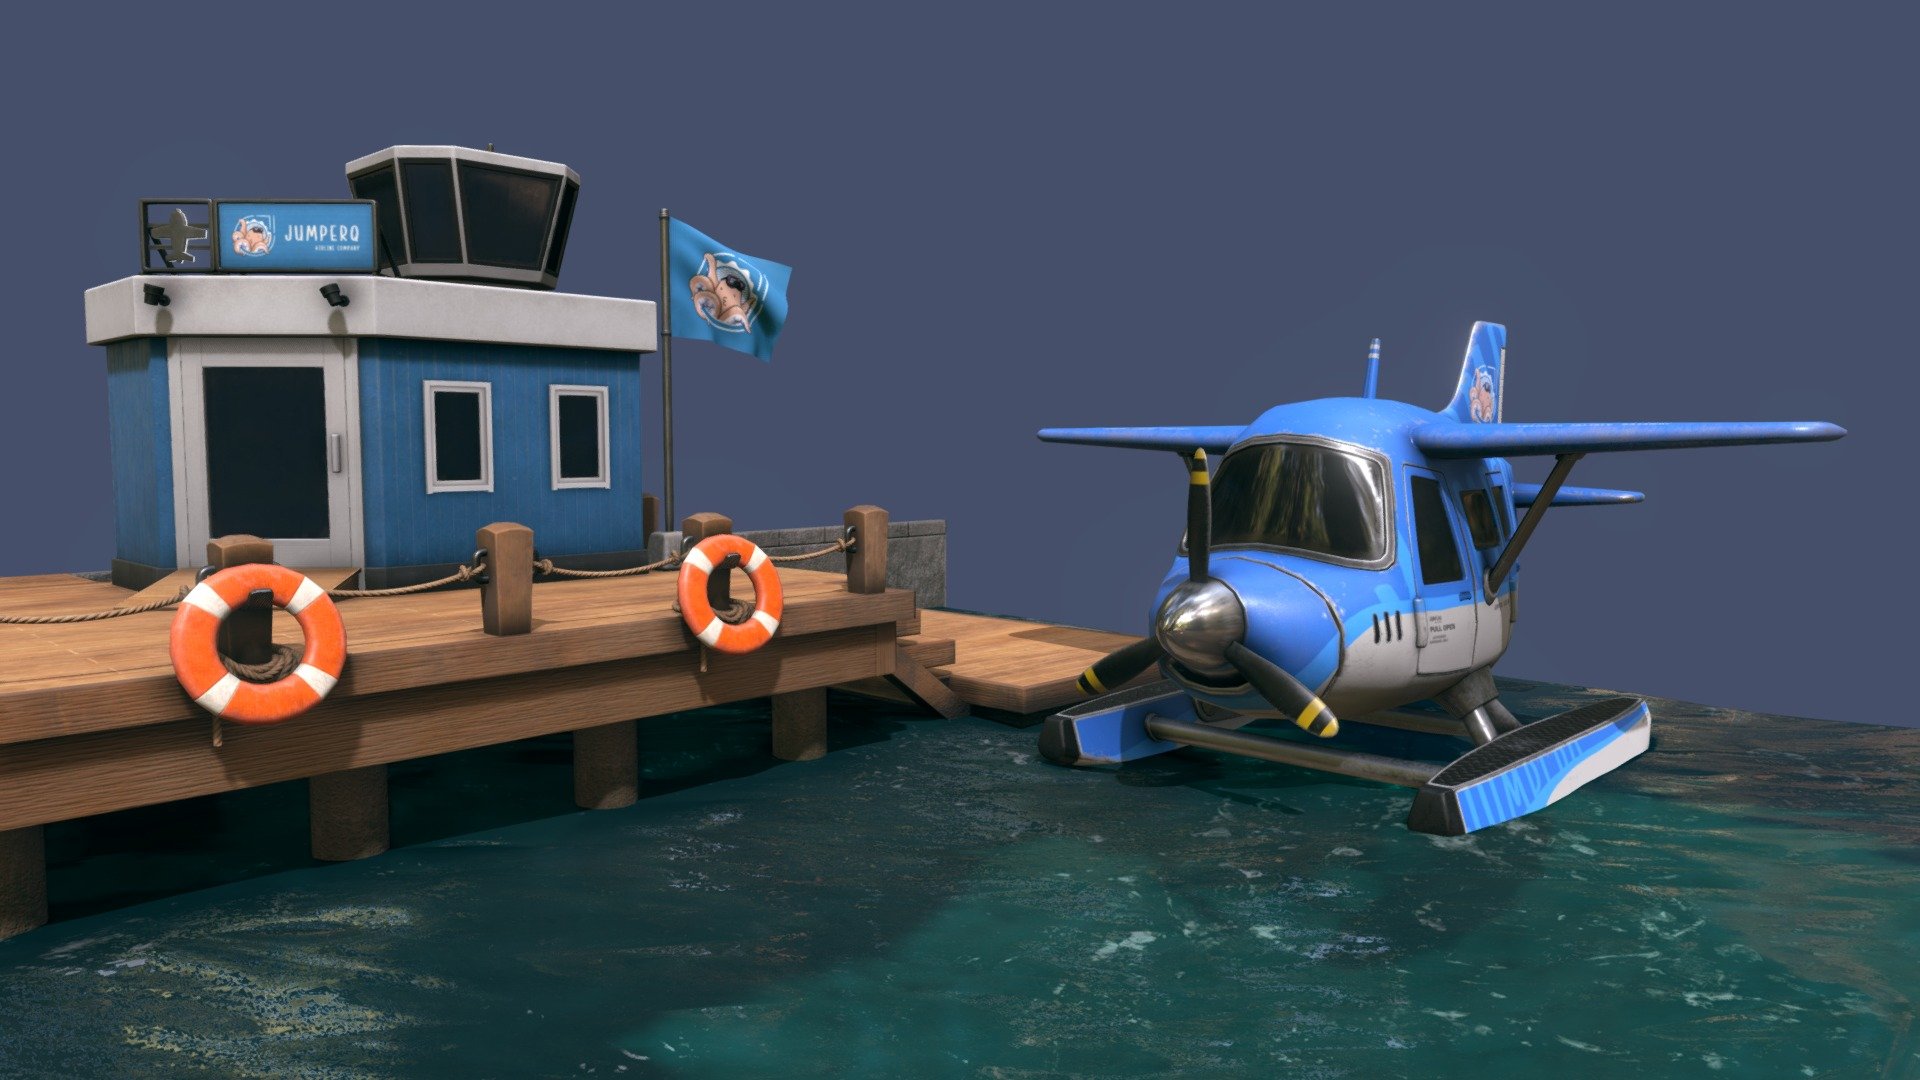 Stylization animal crossing little water airport，but i don't know how to upload solution animation，I am currently using Maya，If someone knows how to do it, please teach me to finish it. Thank you very much!

——————————————————————————————————————————

kyzy_10642@163.com
31380552@qq.com
WeChat：kyzy_10642 - Stylization animal crossing little water airport - 3D model by kyzy_10642 3d model